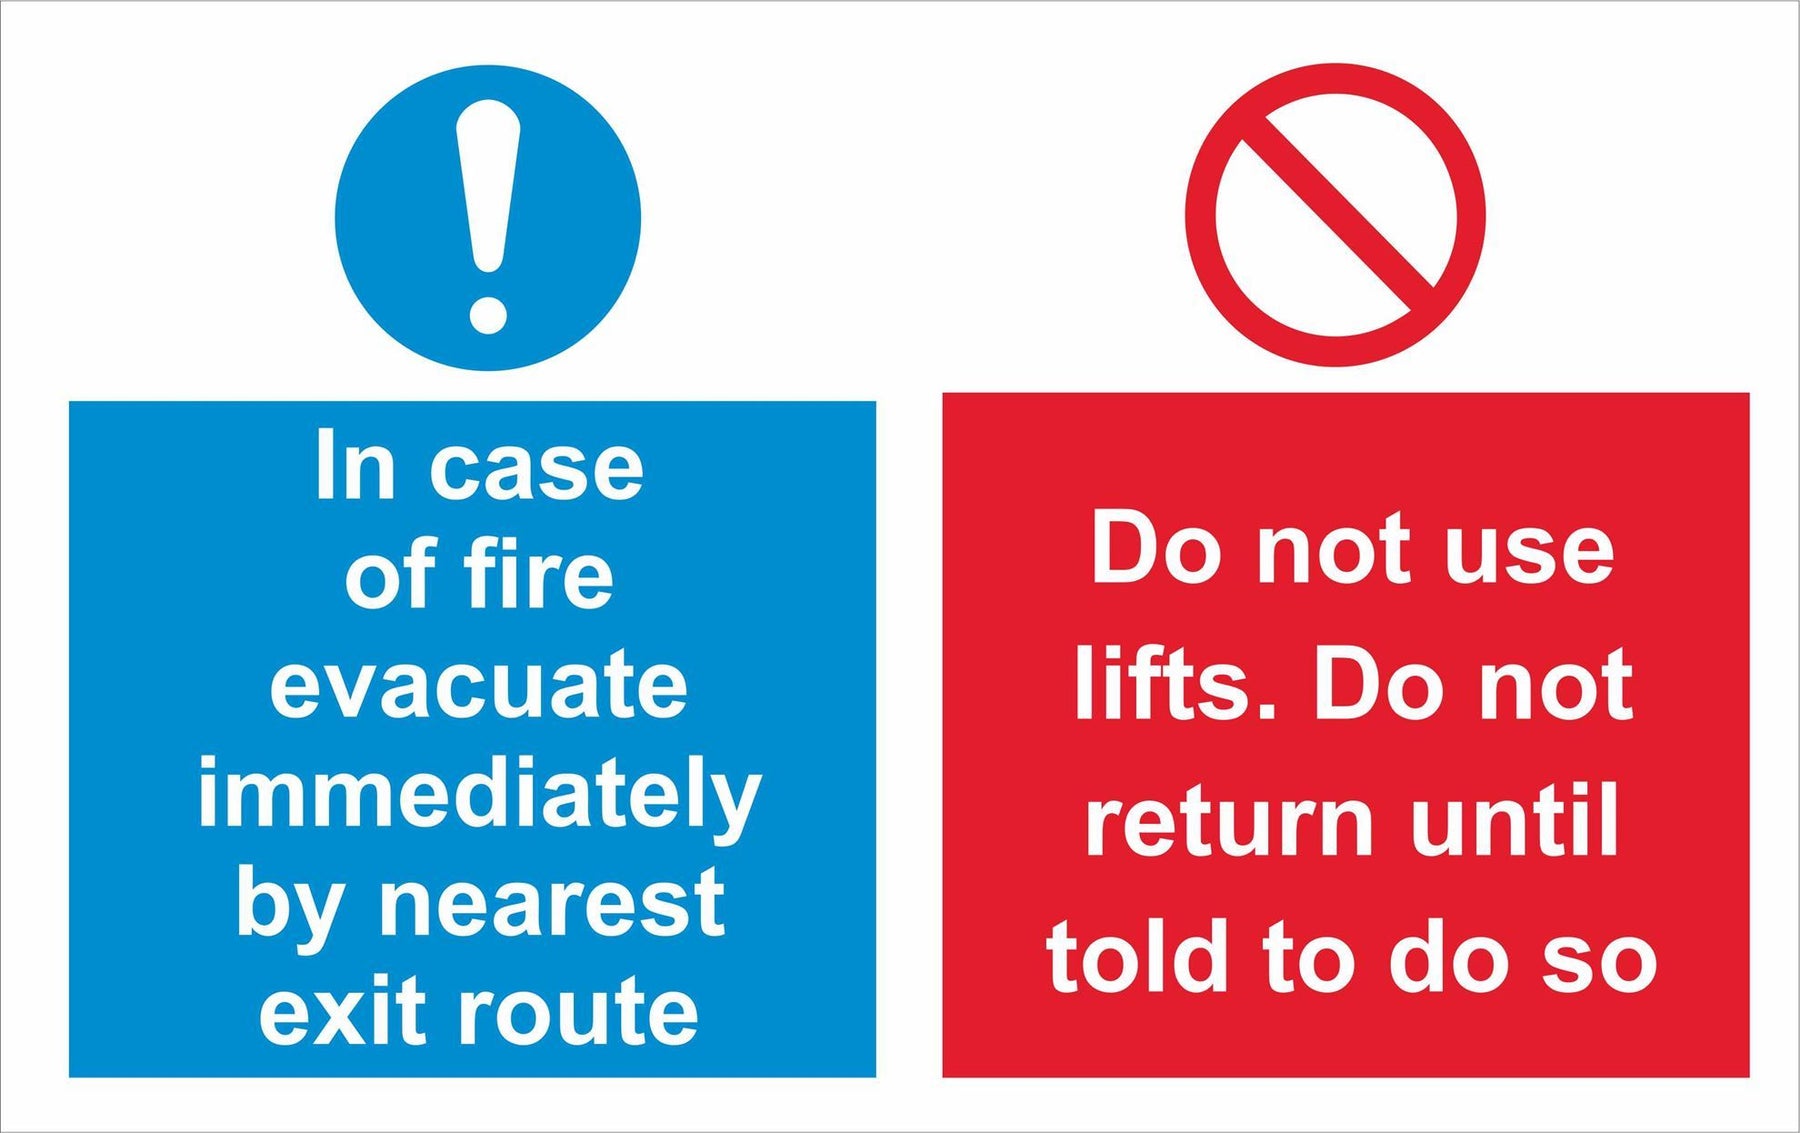 In case of fire evacuate immediately by nearest exit route